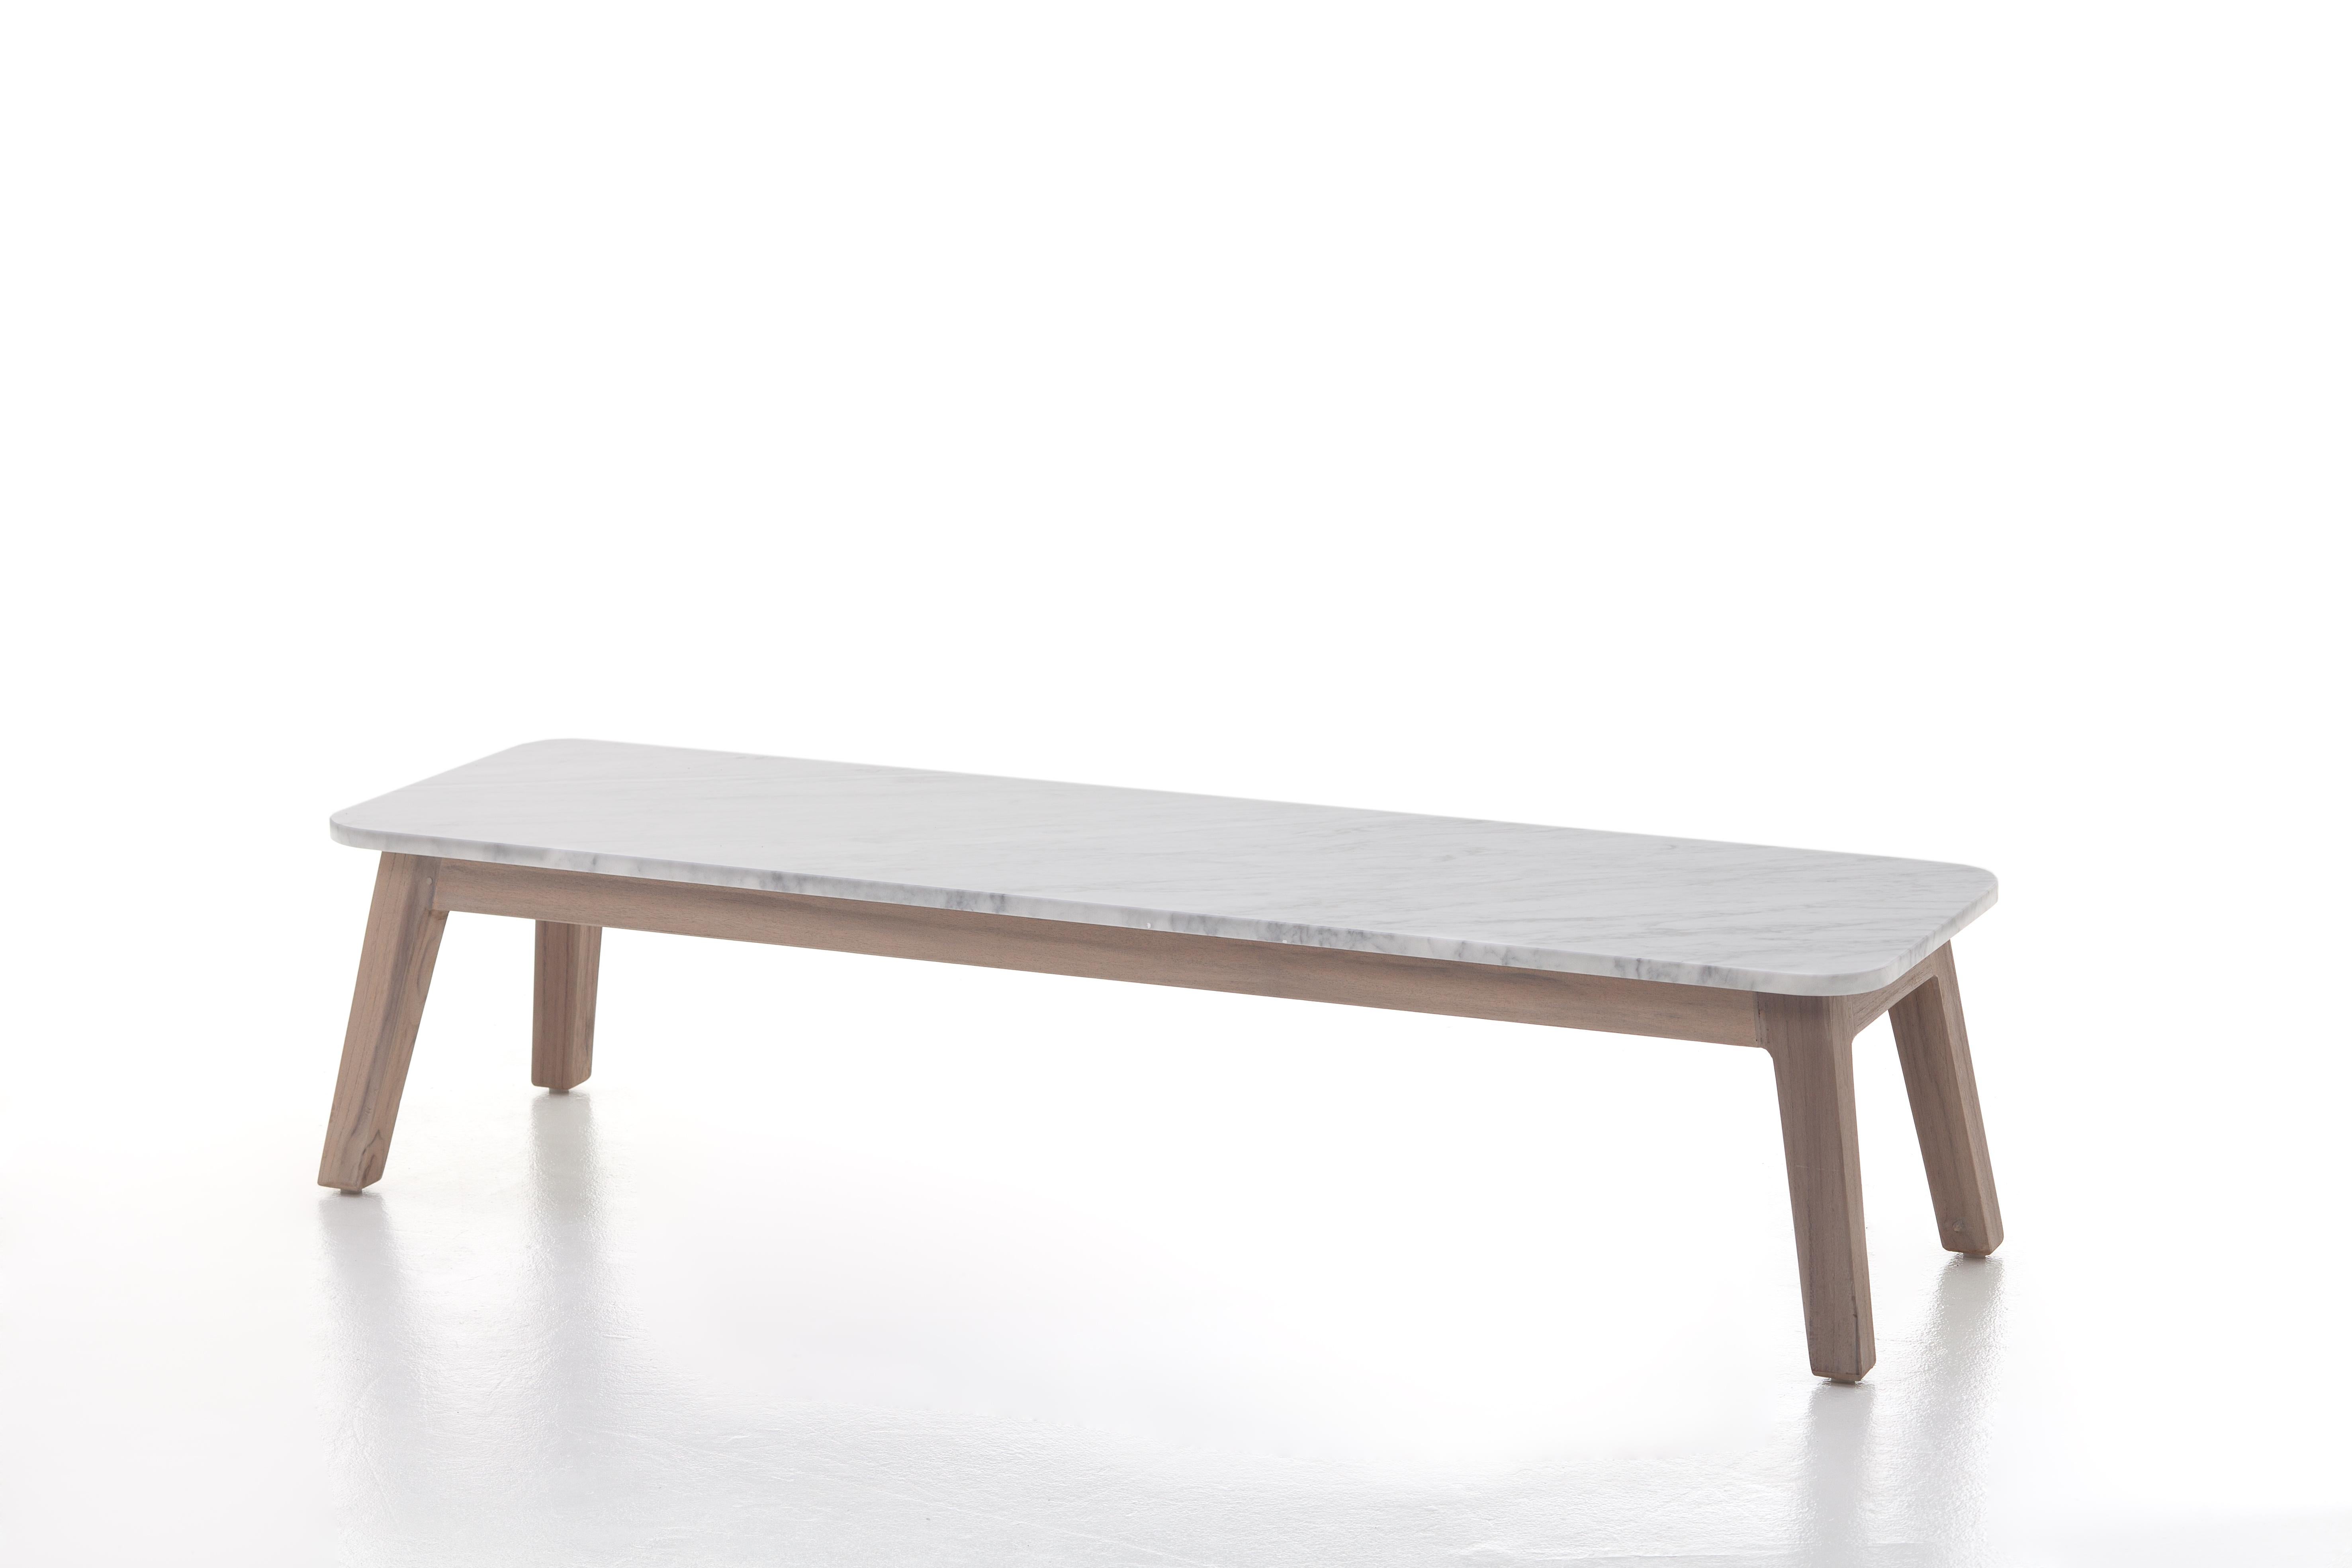 Gervasoni Inout 867 Coffee Table in White Carrara Marble Top & Washed Teak Frame In New Condition For Sale In Brooklyn, NY